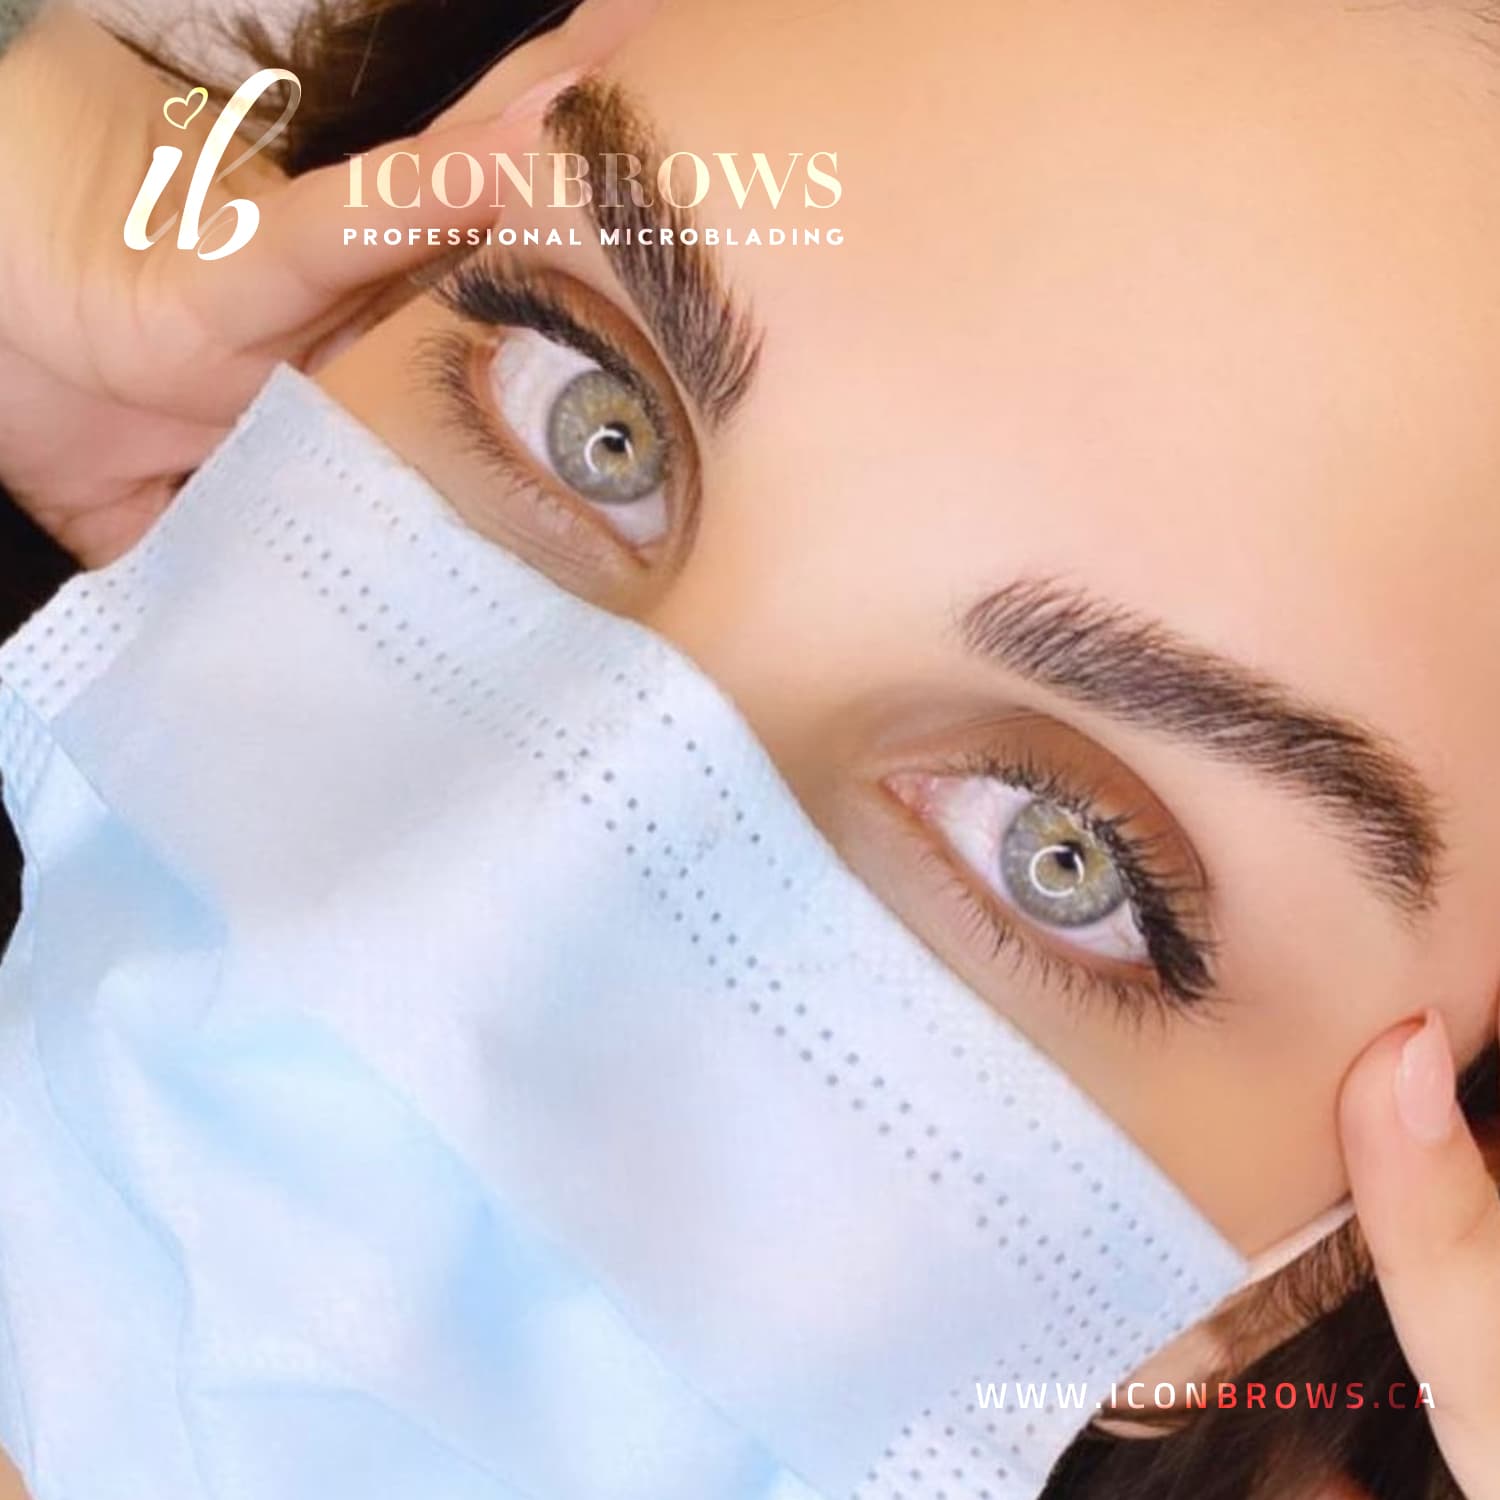 Become a Iconbrows Brow or Lash Model, join our waiting list.